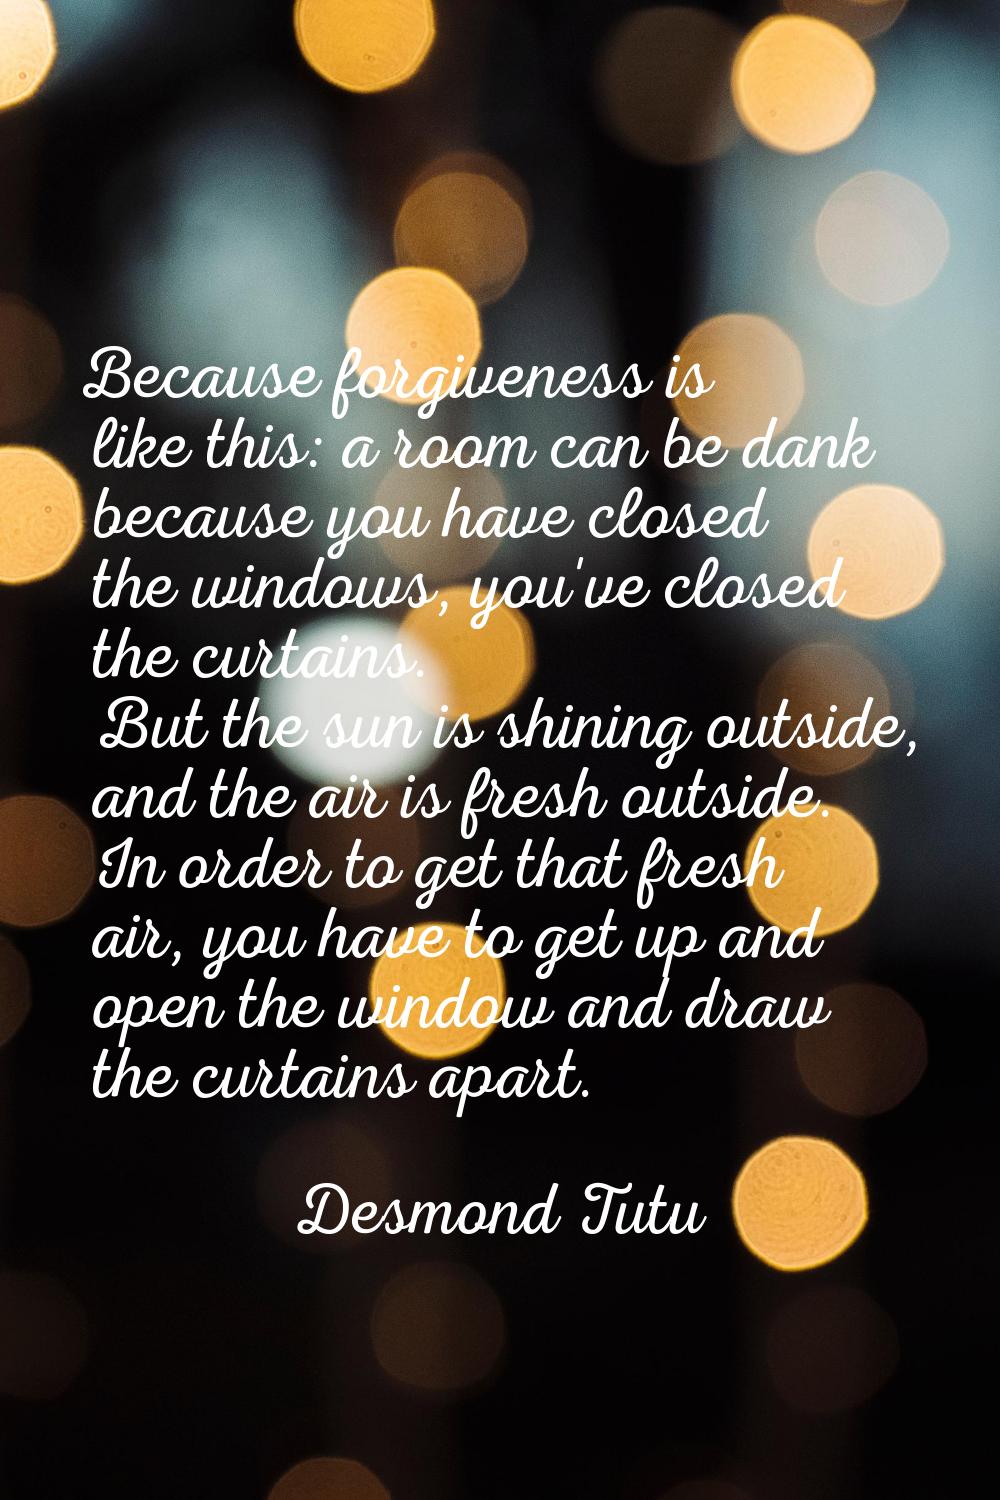 Because forgiveness is like this: a room can be dank because you have closed the windows, you've cl